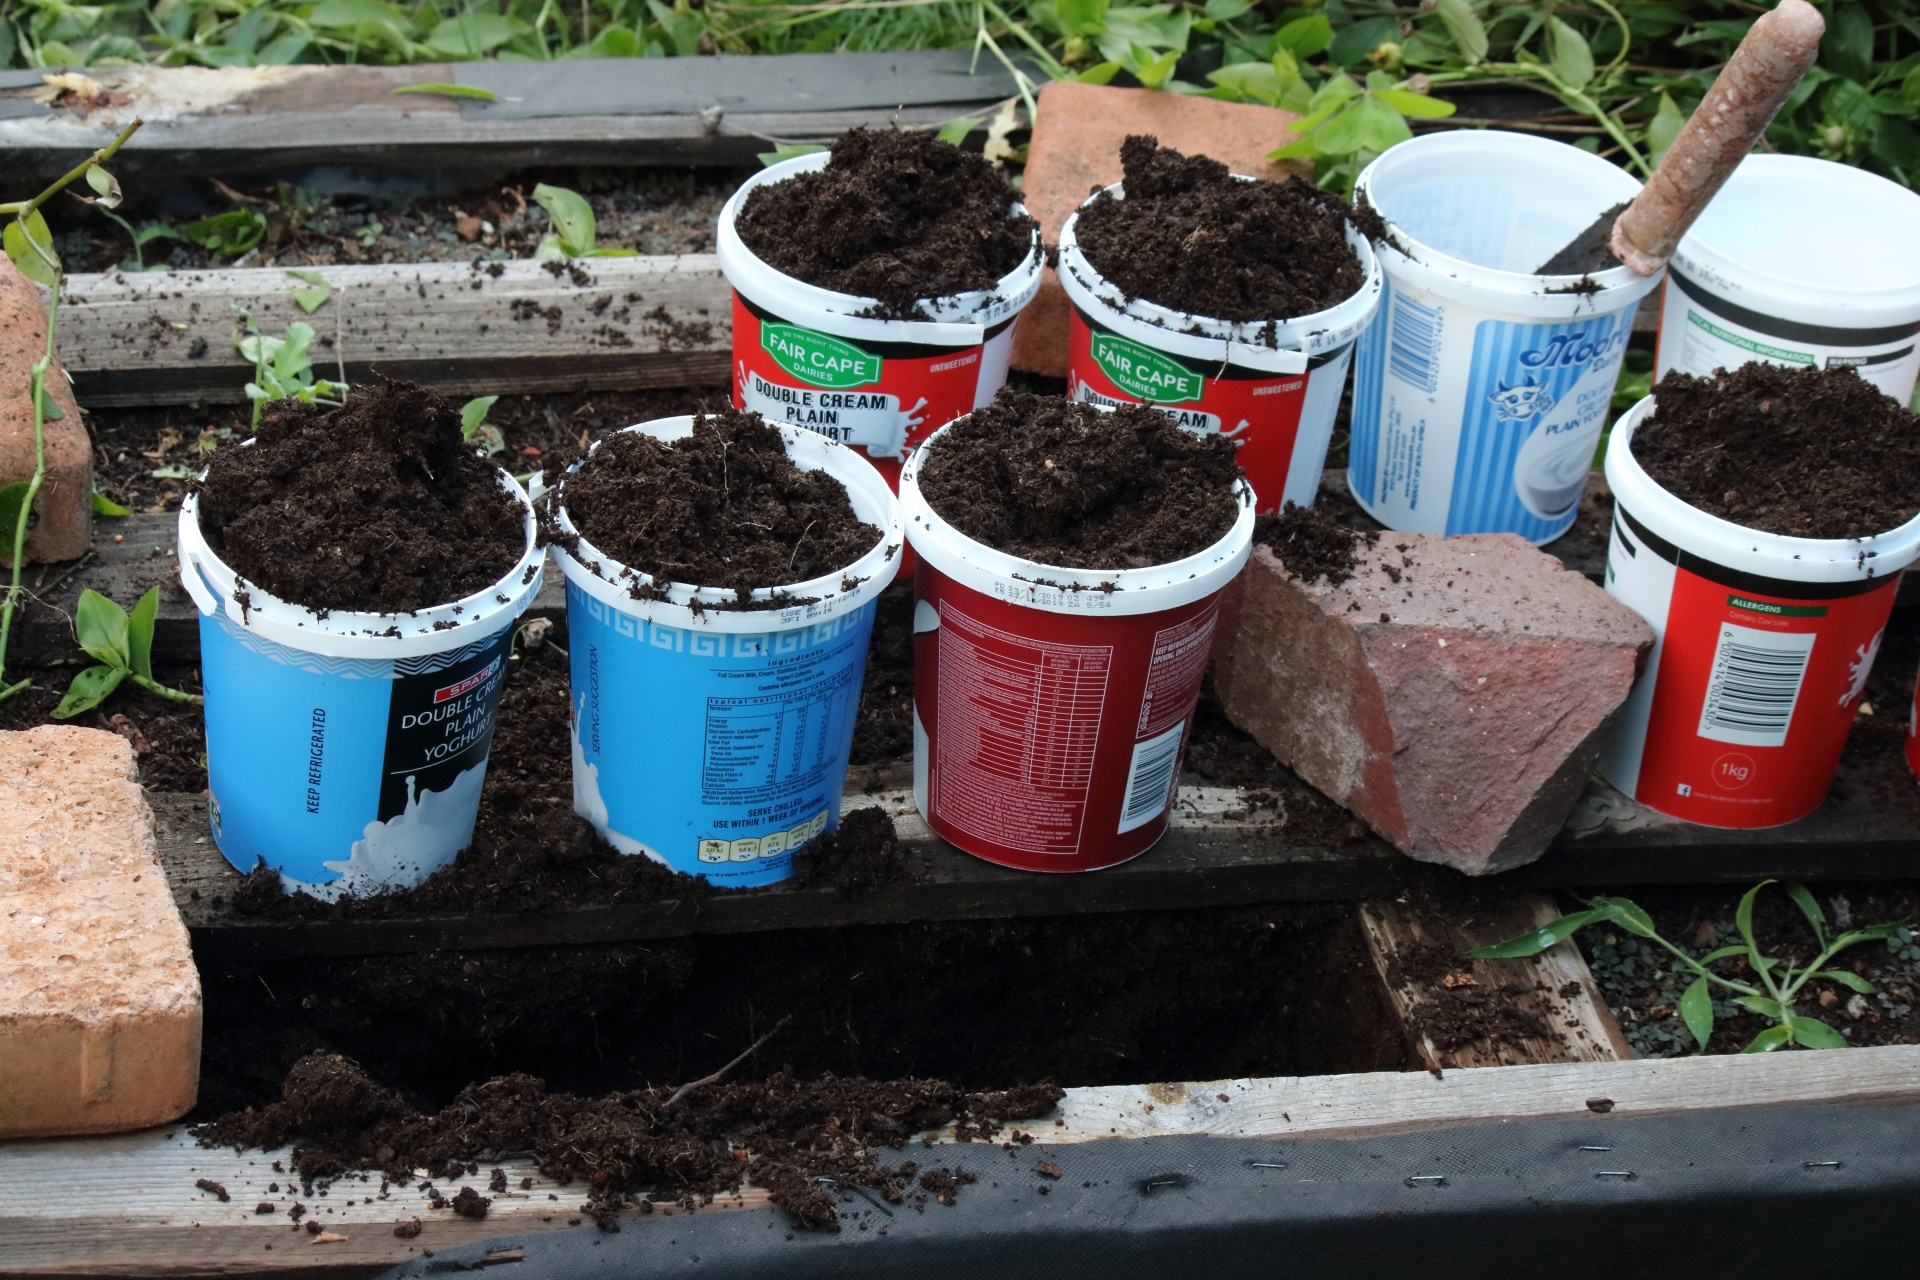 Compost in plastic storage containers